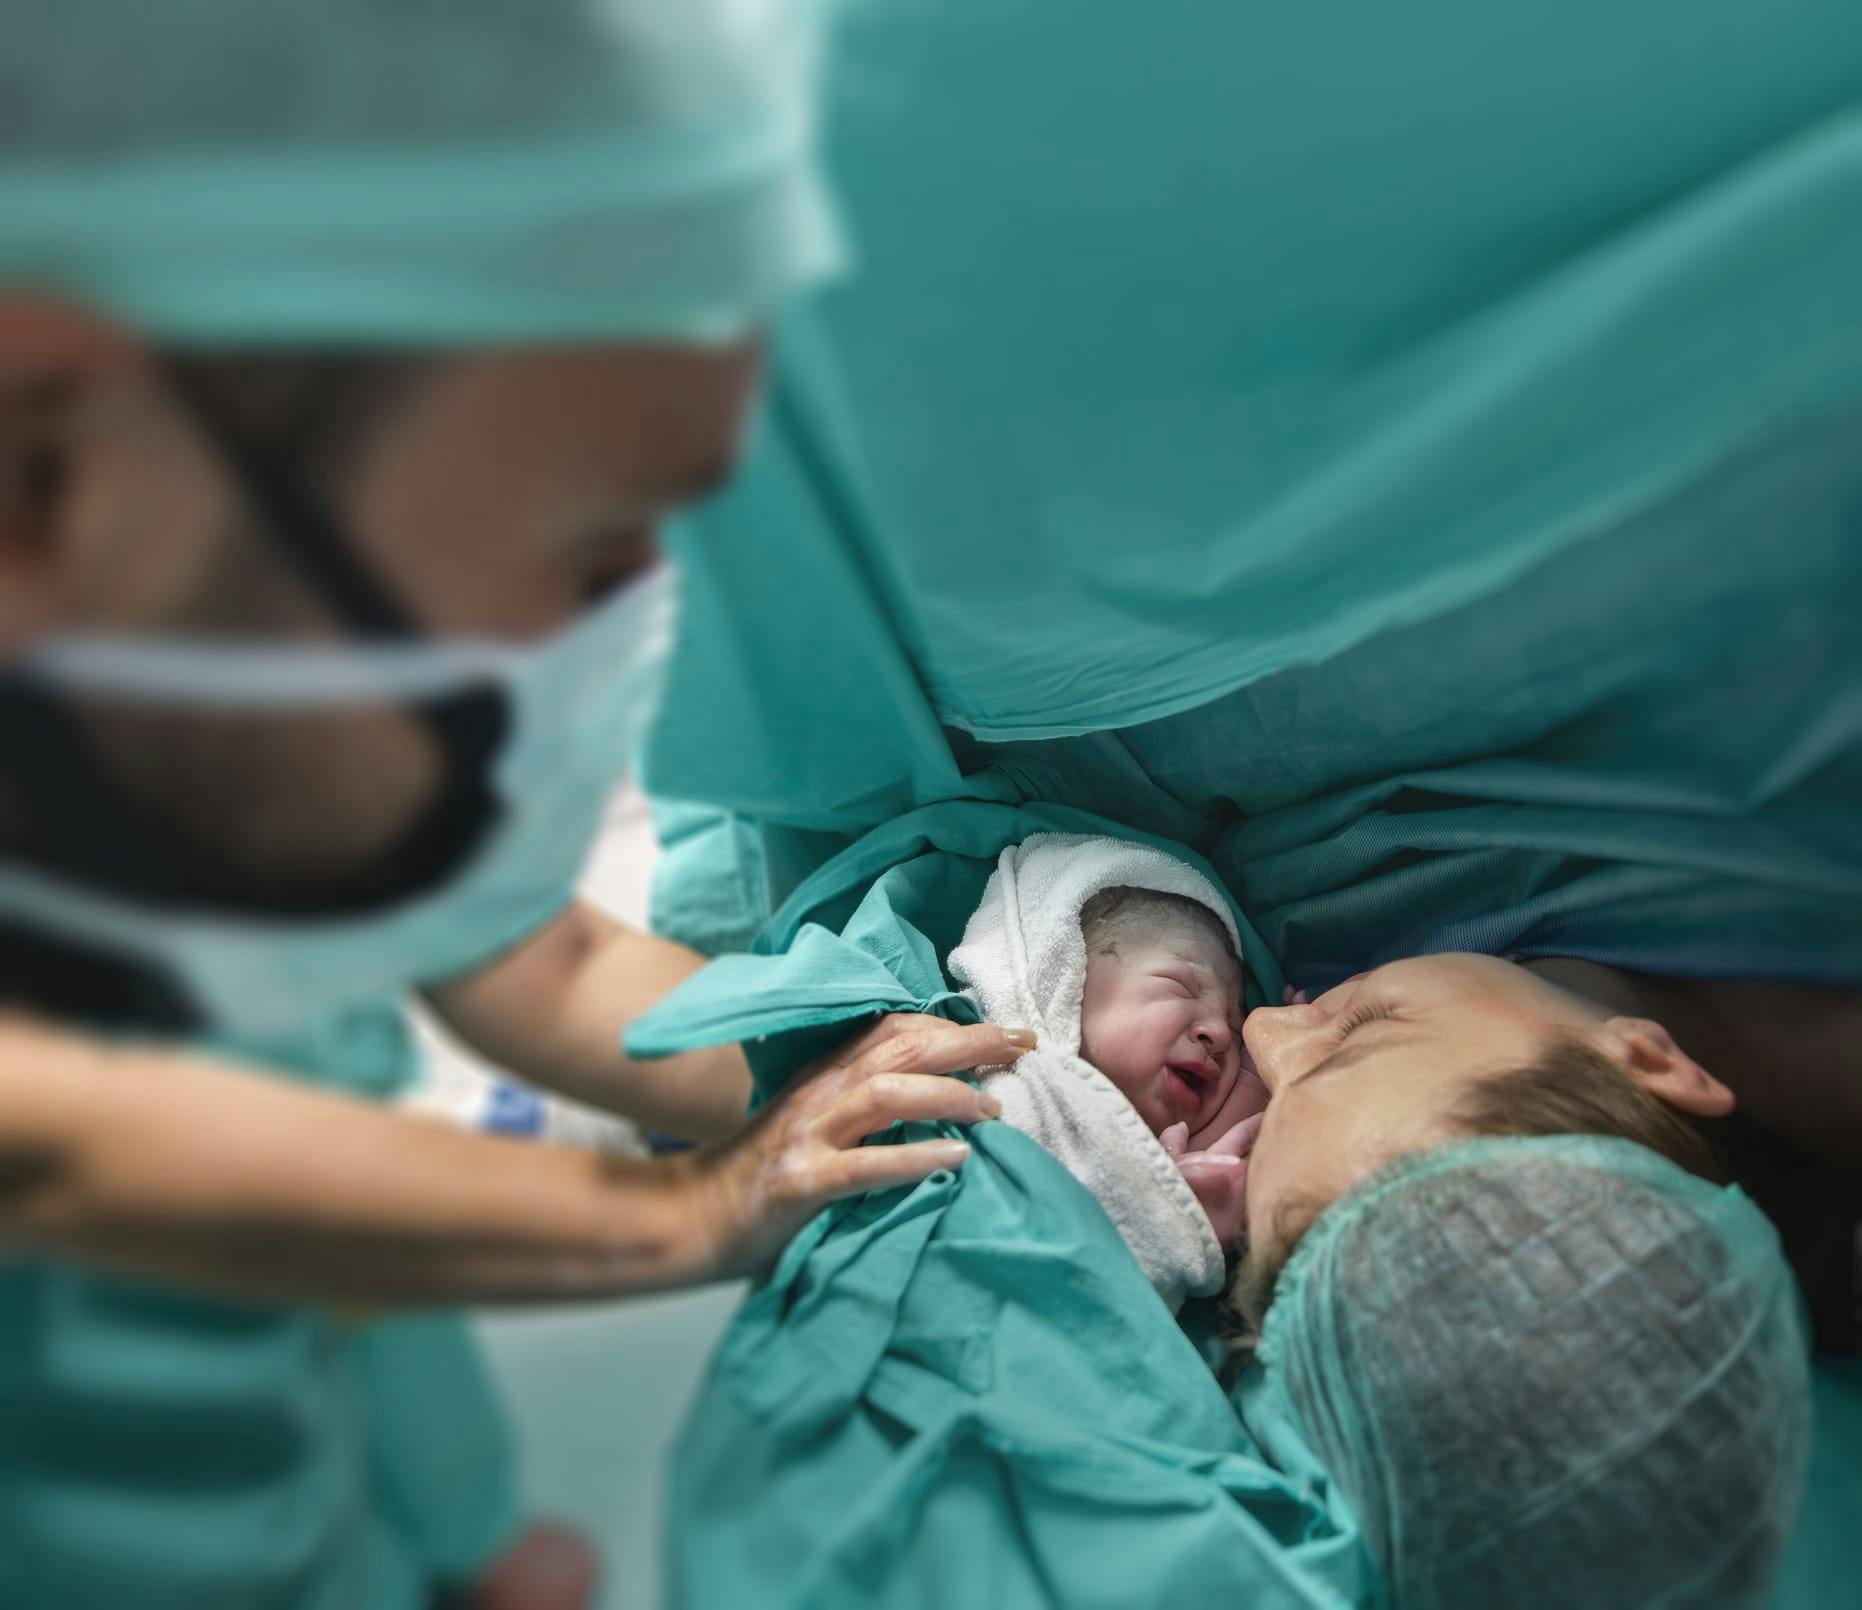 woman meeting her baby for the first time during a c-section